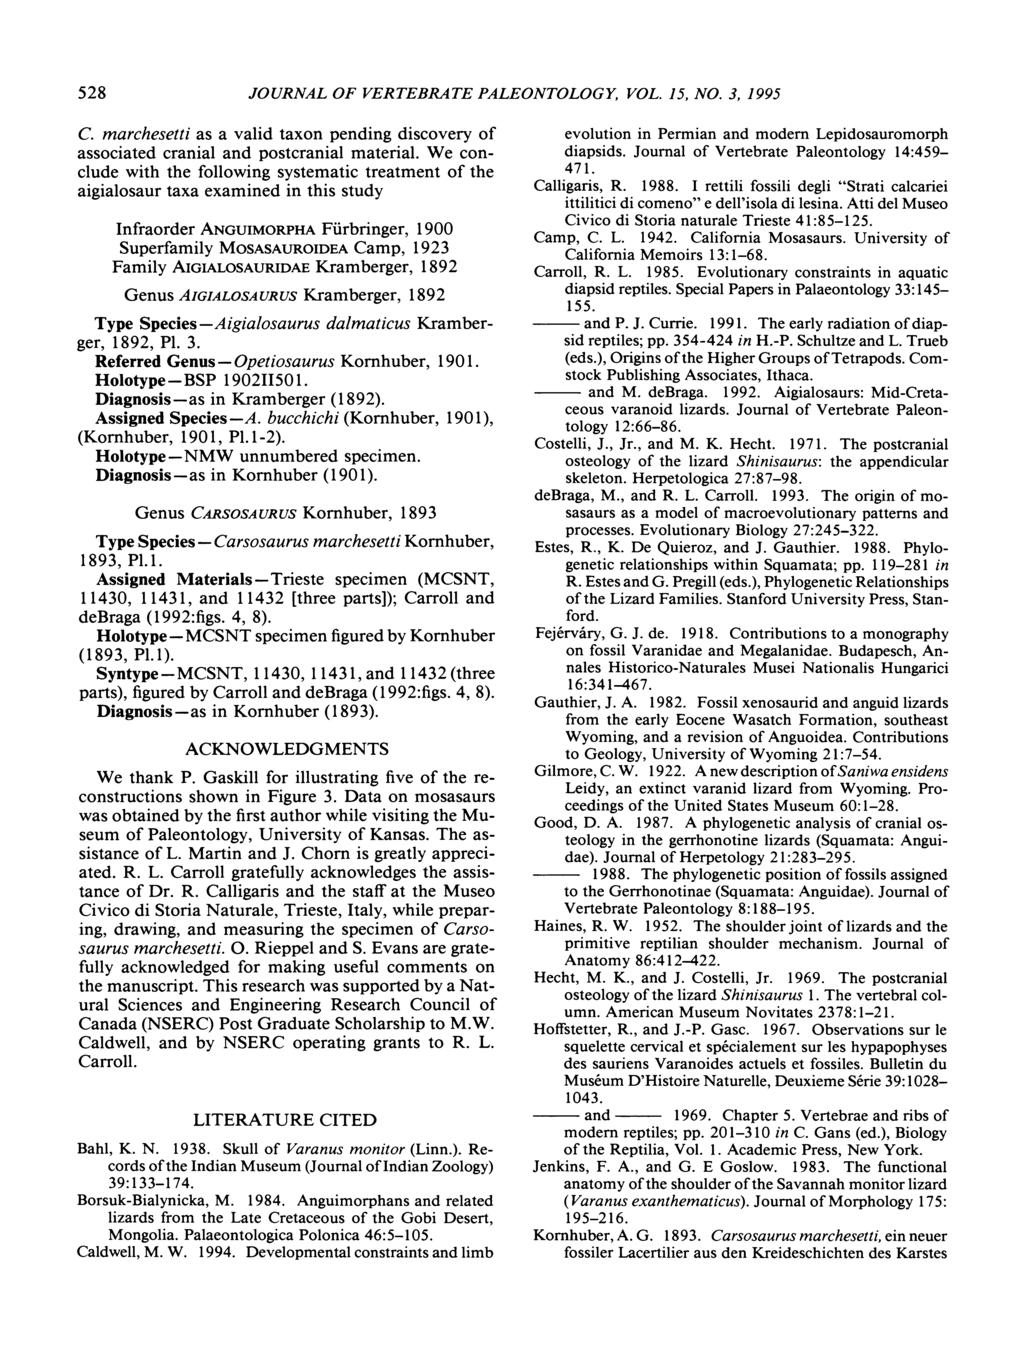 528 JOURNAL OF VERTEBRATE PALEONTOLOGY, VOL. 15, NO.3, 1995 C. marchesetti as a valid taxon pending discovery of associated cranial and postcranial material.